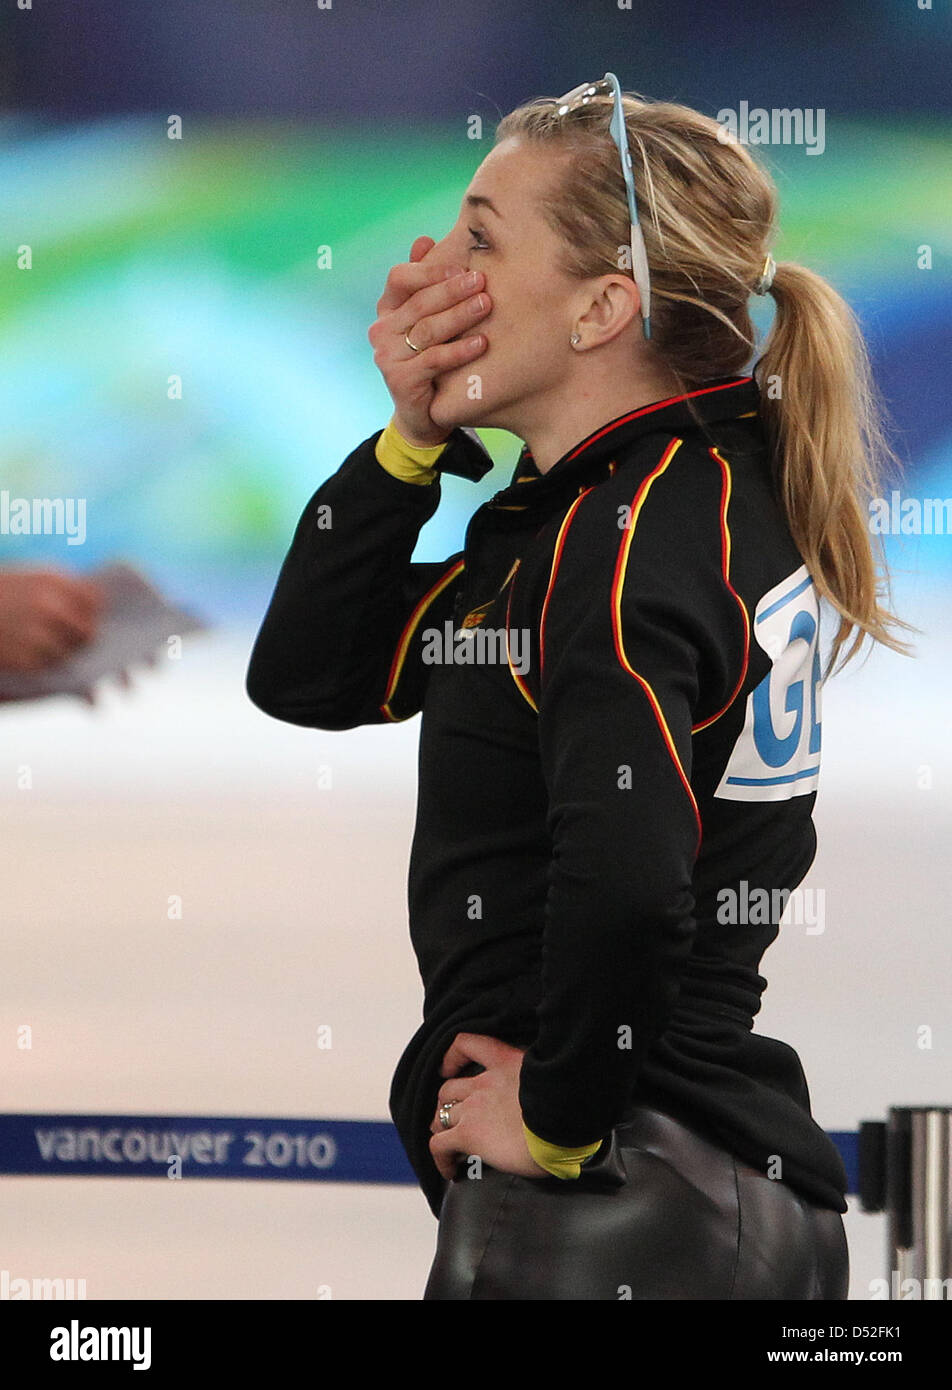 Anni Friesinger-Postma of Germany watches at the results after the Speed Skating Women's team pursuit quarterfinal at the Richmond Olympic Oval during the Vancouver 2010 Olympic Games, Vancouver, Canada, 26 February 2010. Photo: Daniel Karmann  +++(c) dpa - Bildfunk+++ Stock Photo